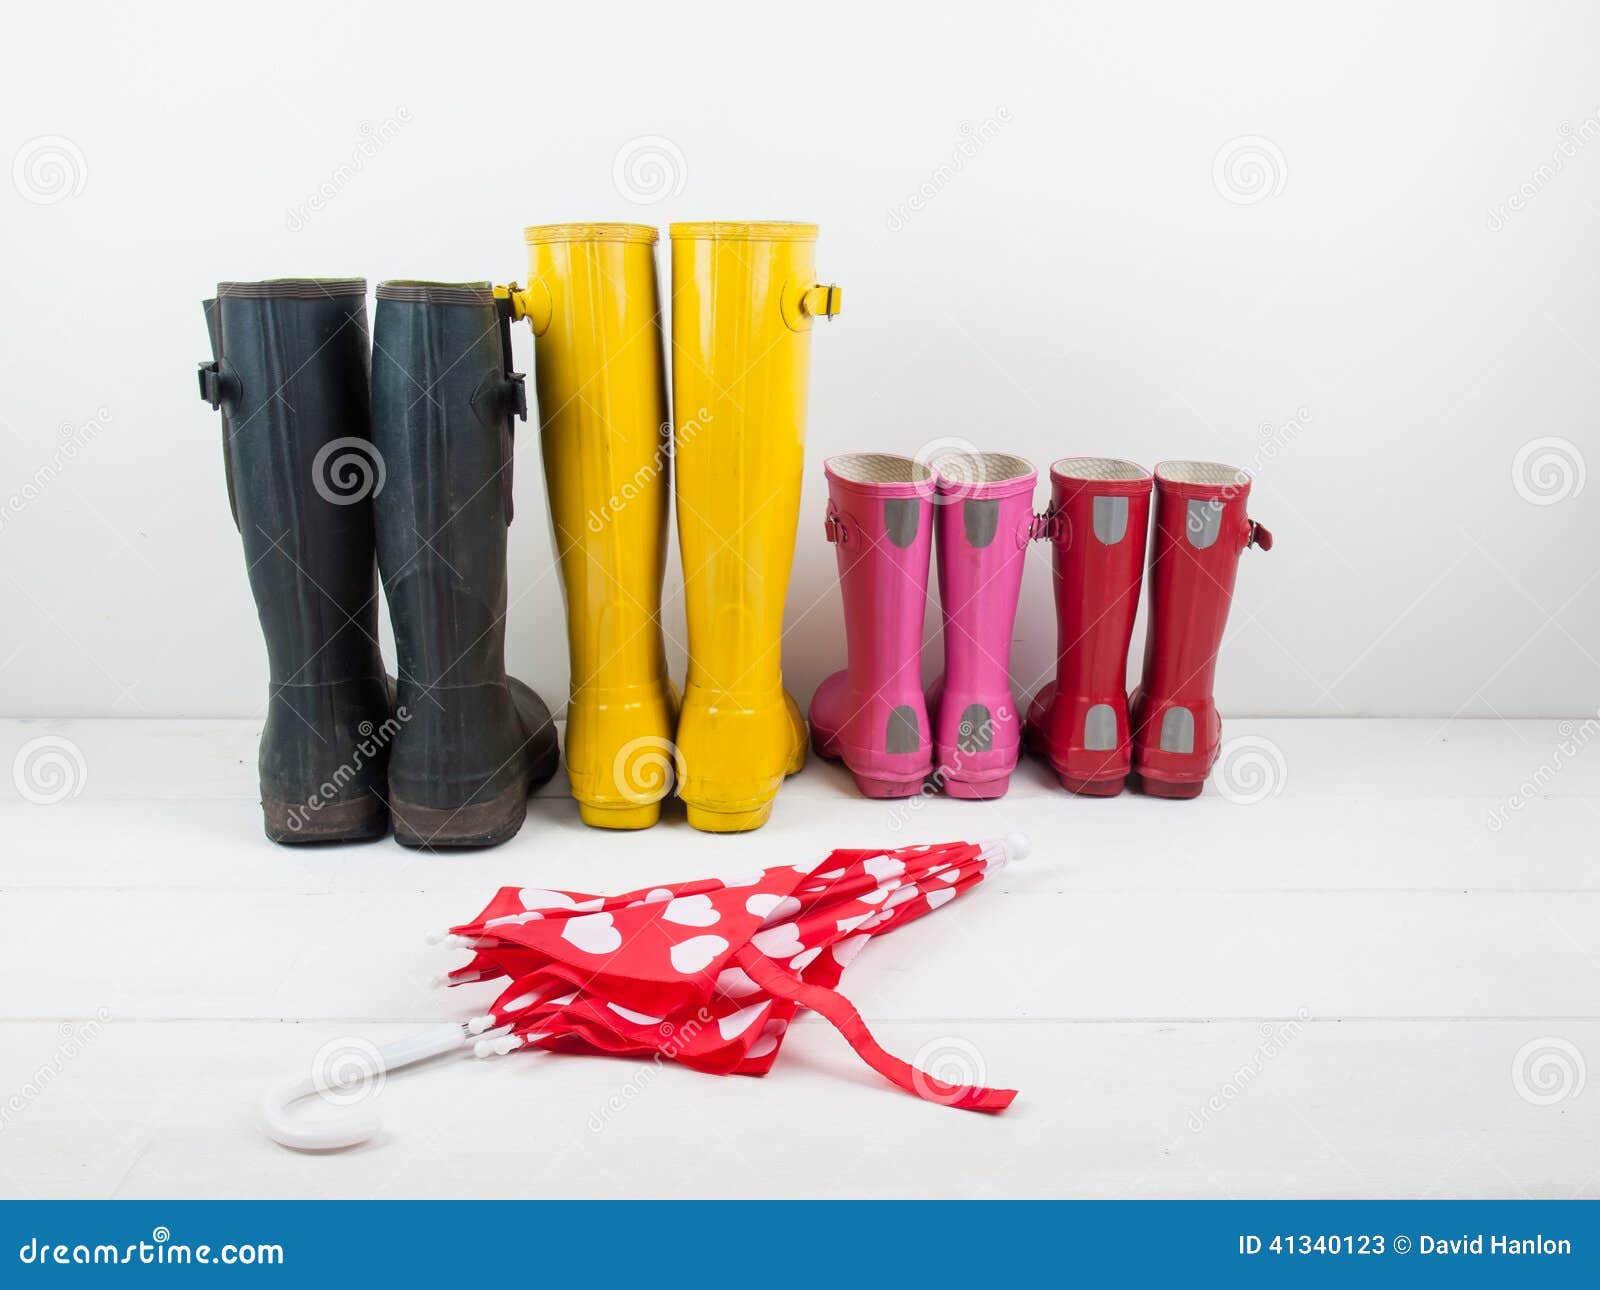 Rubber Boots with an Umbrella Against a White Wall Stock Image - Image ...